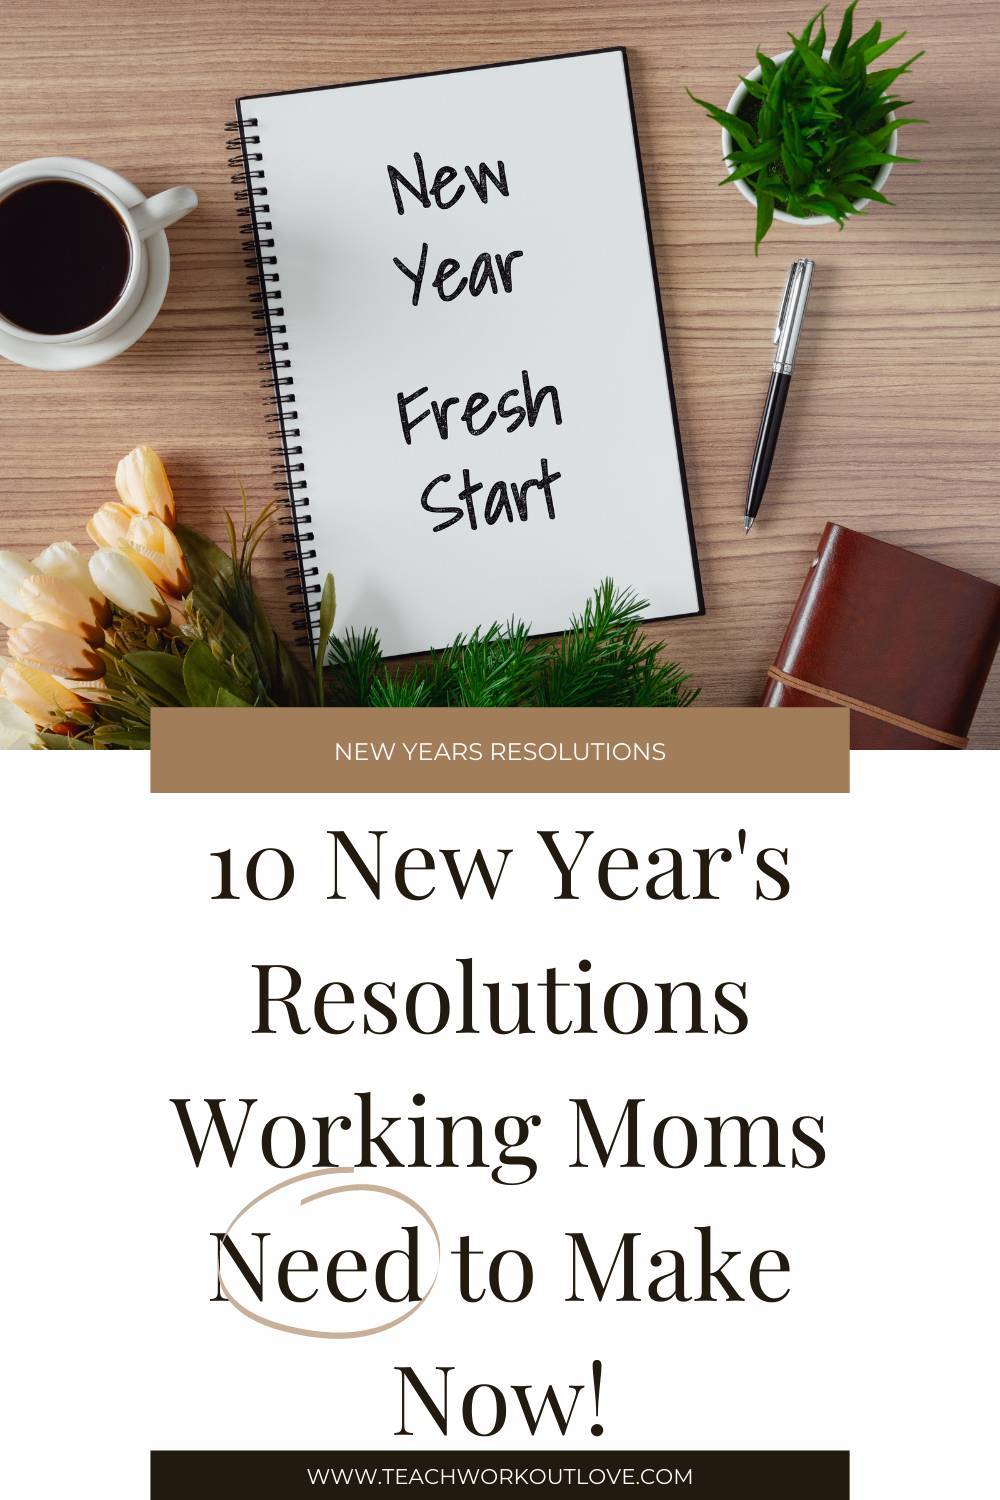 Working moms are always juggling work and family. And 2020 has been especially cruel. So, check out these three resolutions that will make your 2021 better.